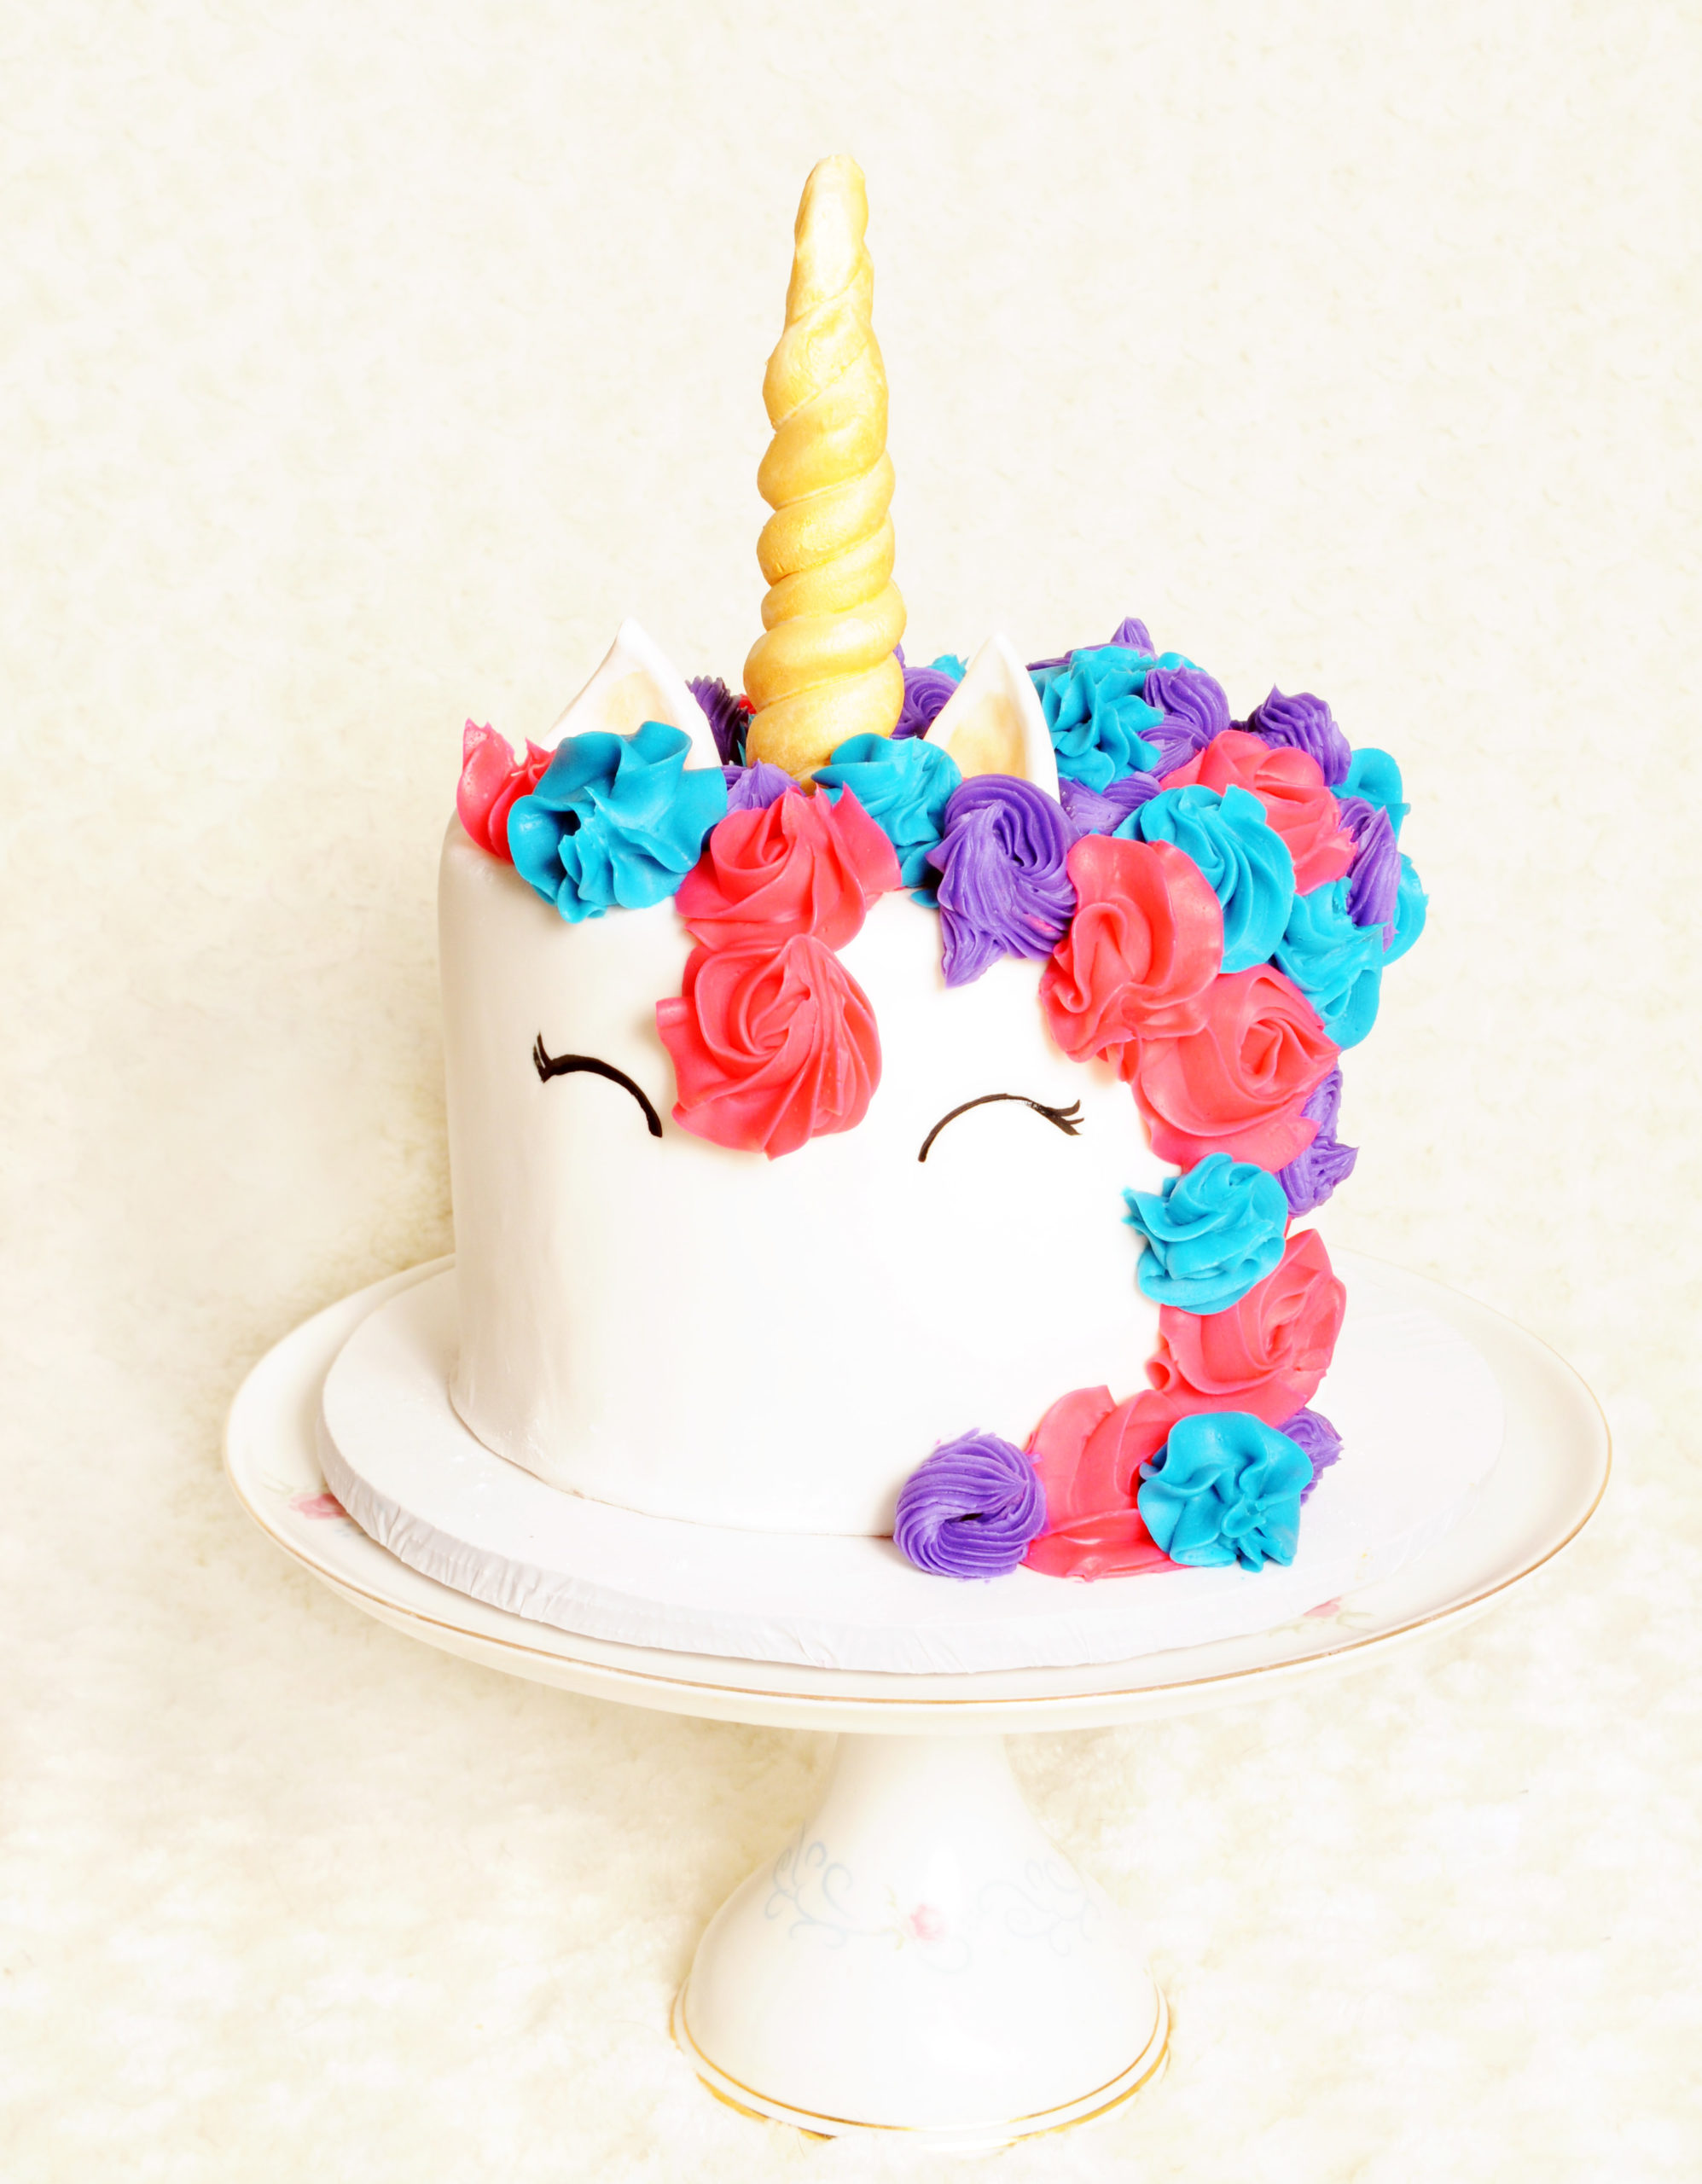 Rainbow Cotton Candy Cakes : Sweet Fluffe Cotton Candy Creations